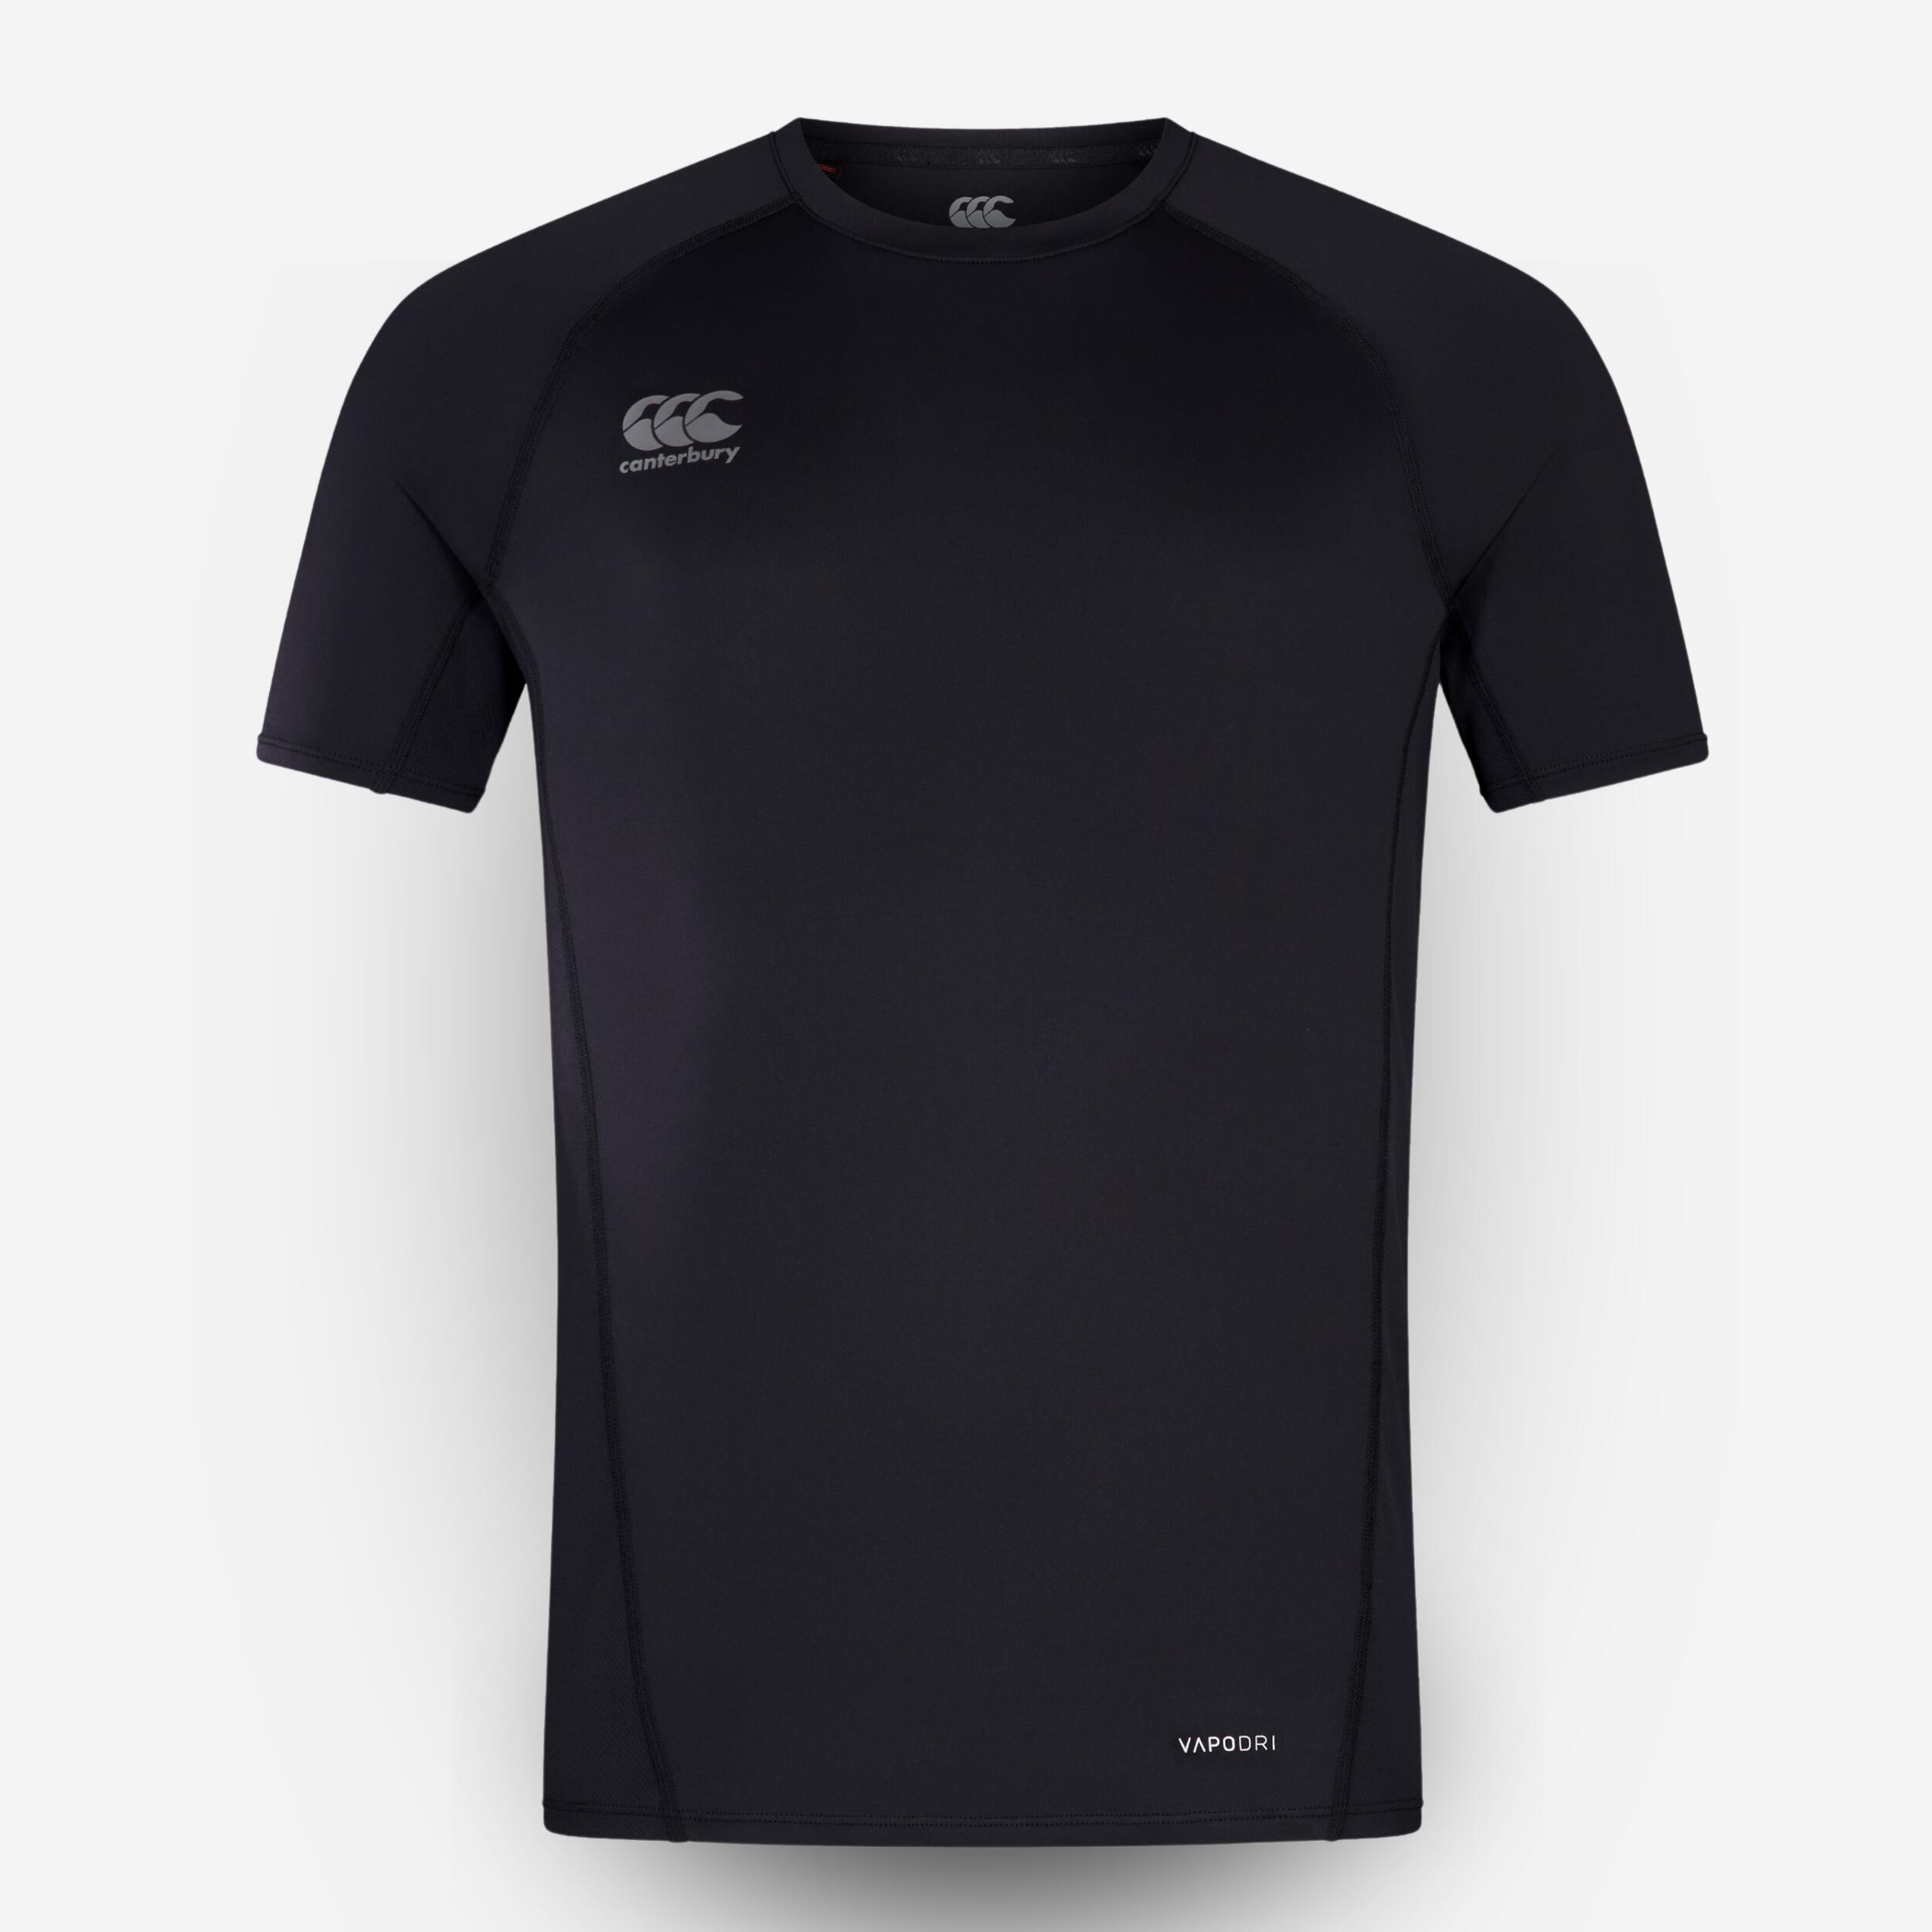 CANTERBURY Maillot Manches Courtes De Rugby Adulte - Ccc Small Logo Super Light Tee Noir